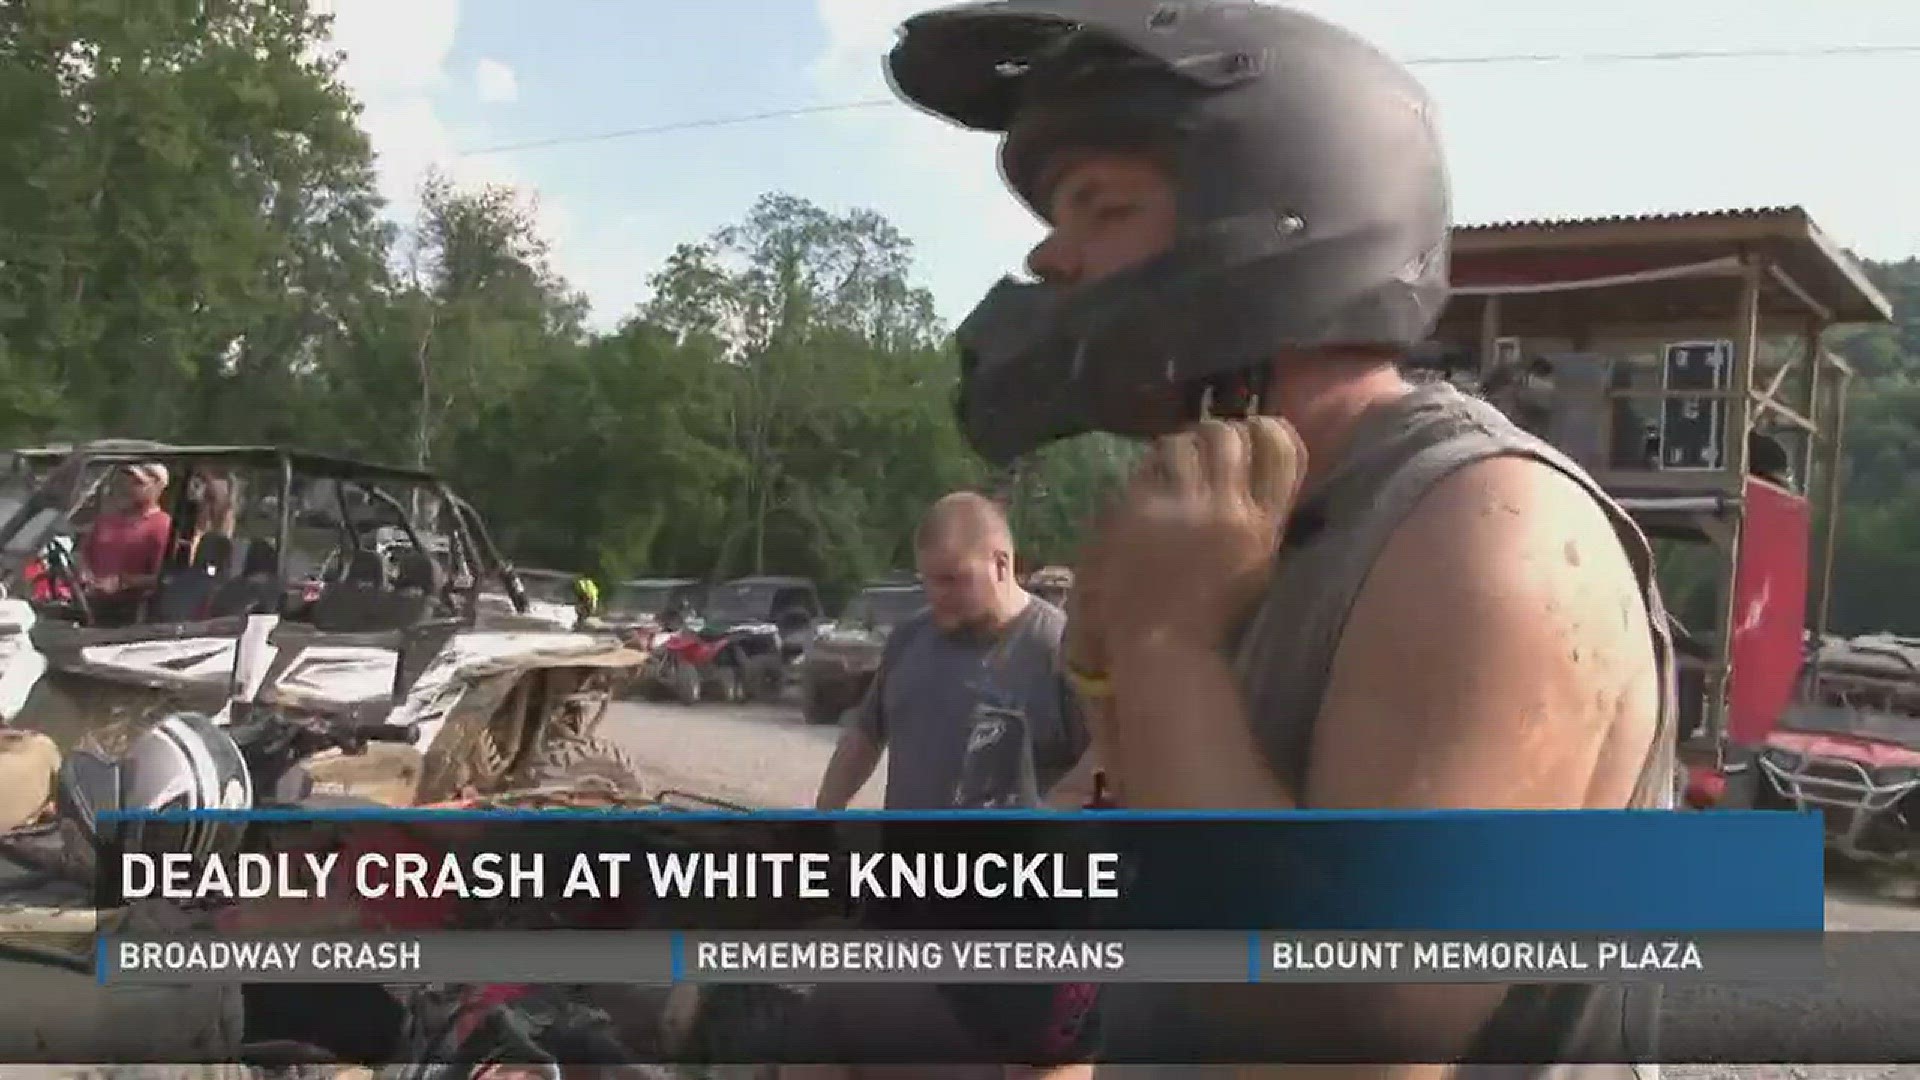 Two crashes have occurred this weekend at the white knuckle ATV festival in Scott County.